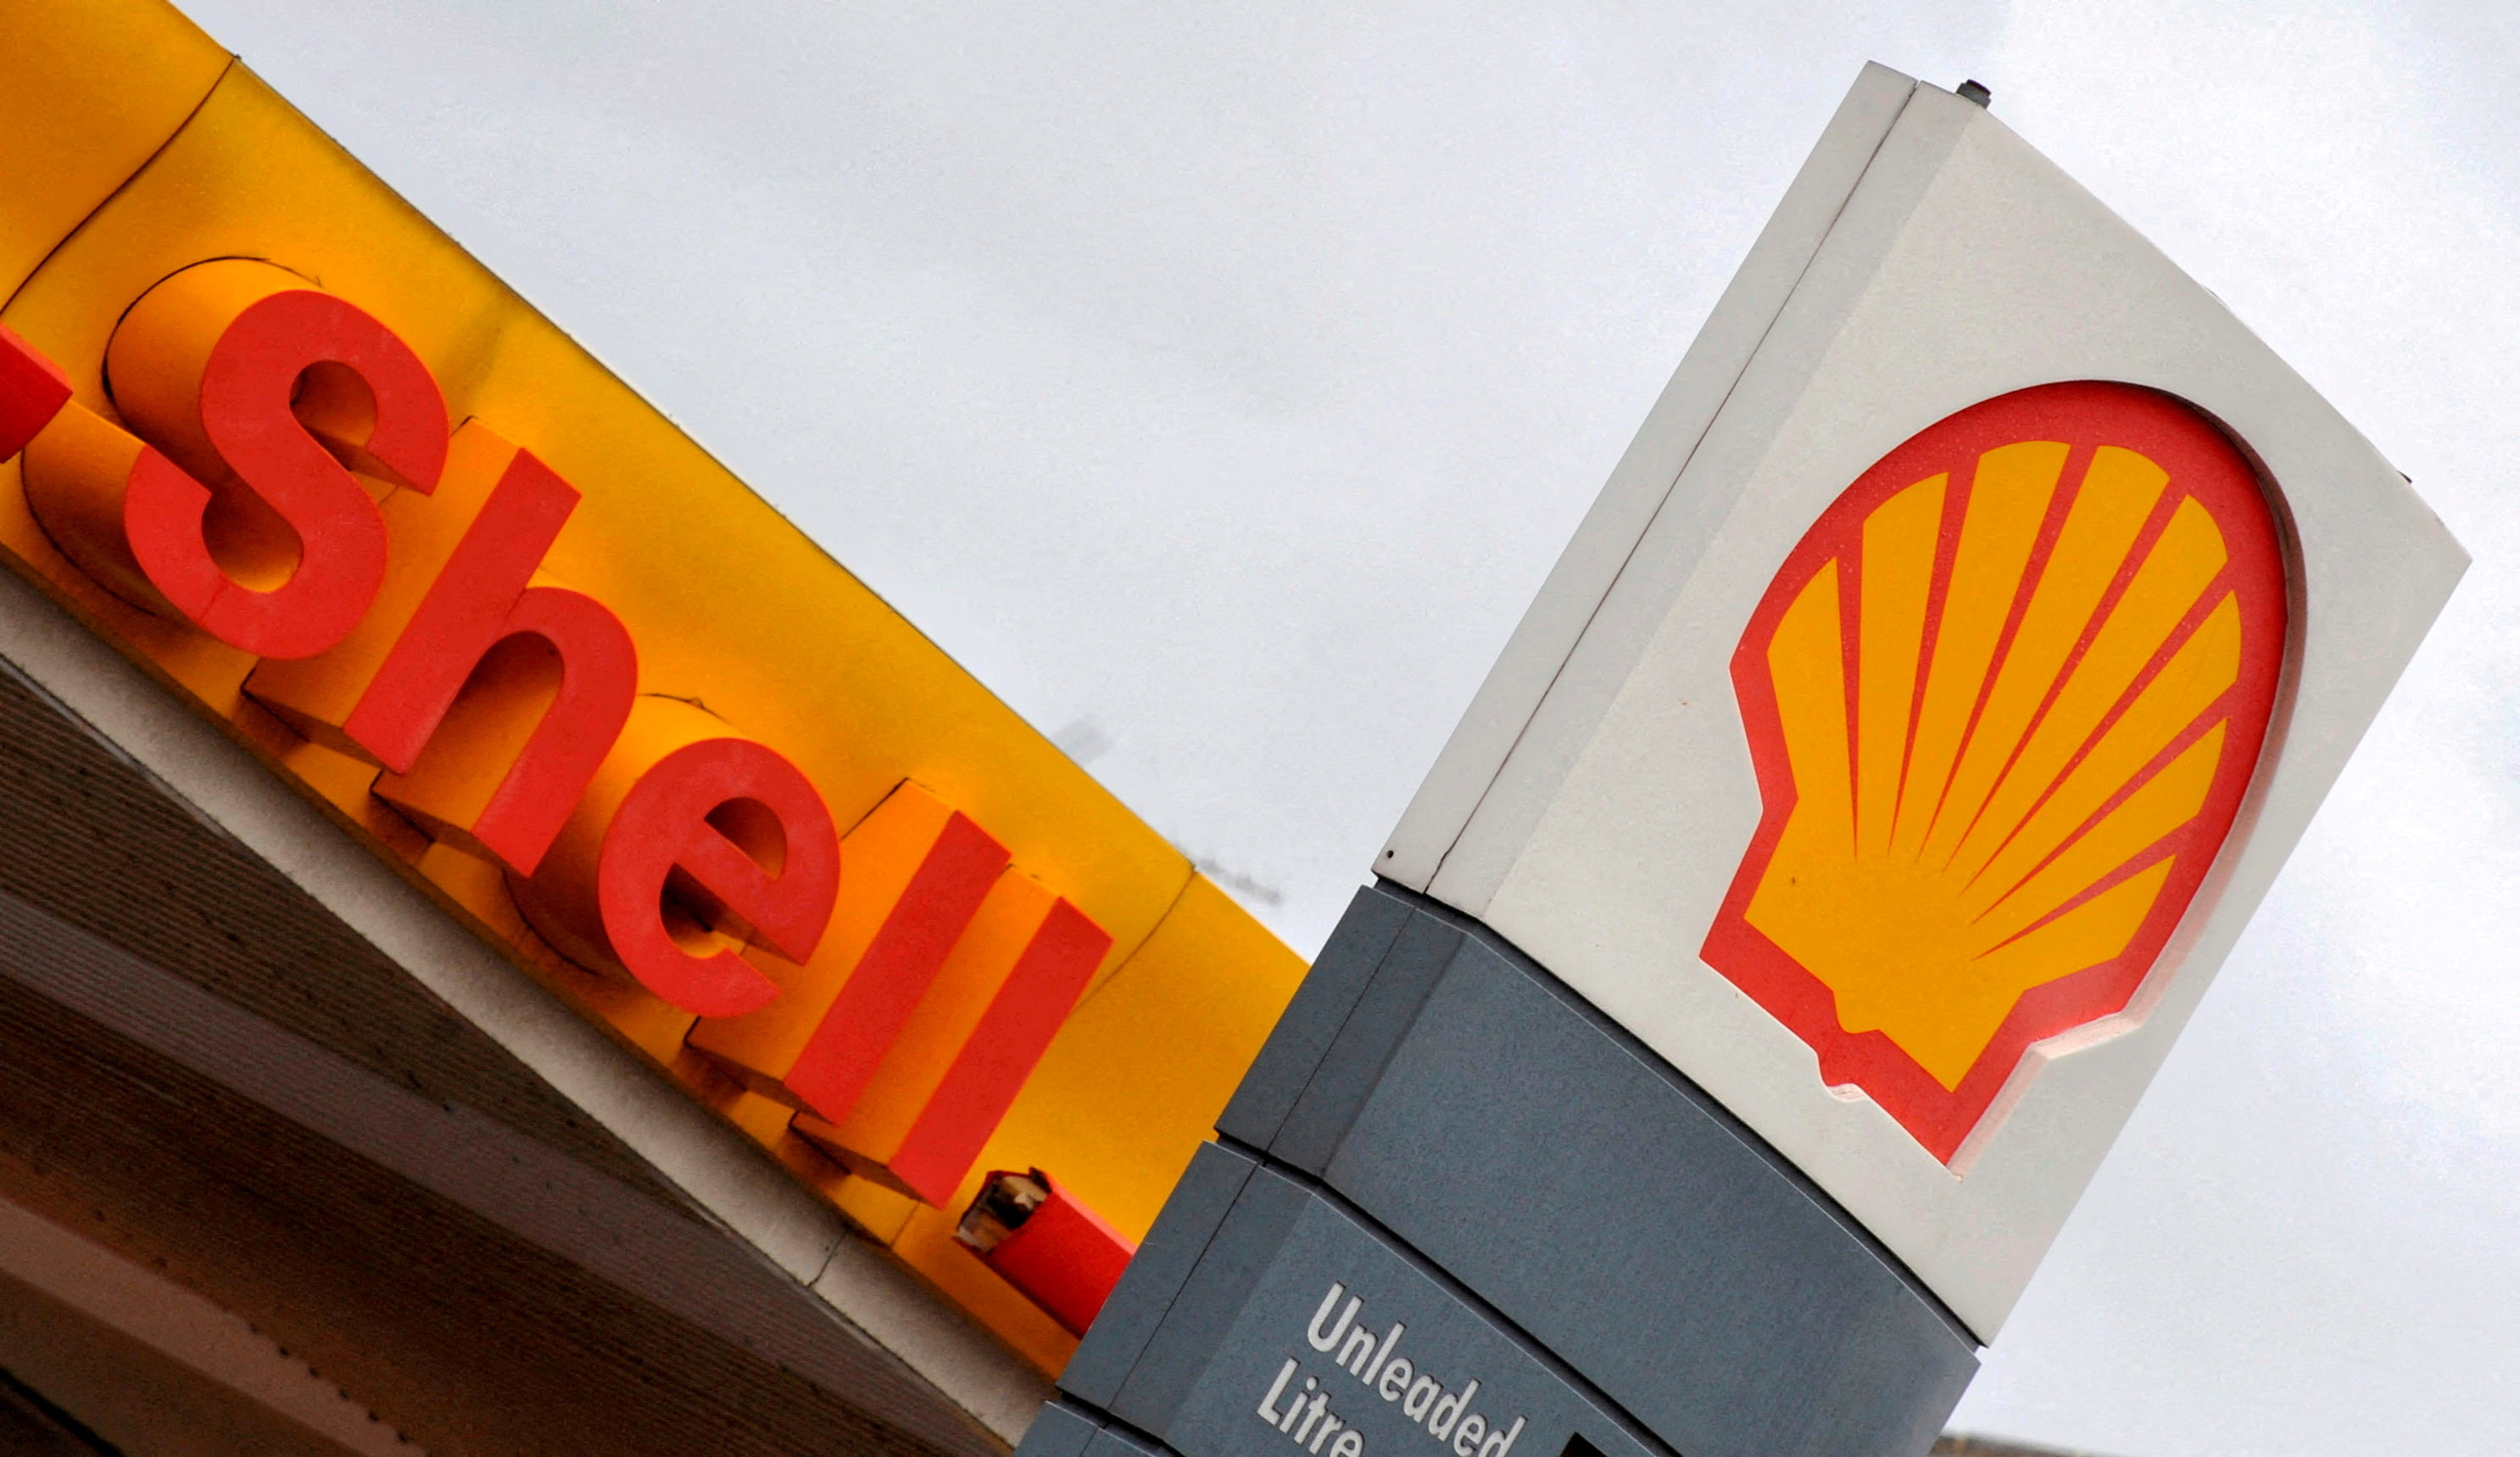 The Shell logo is located at a Shell gas station in London, Britain